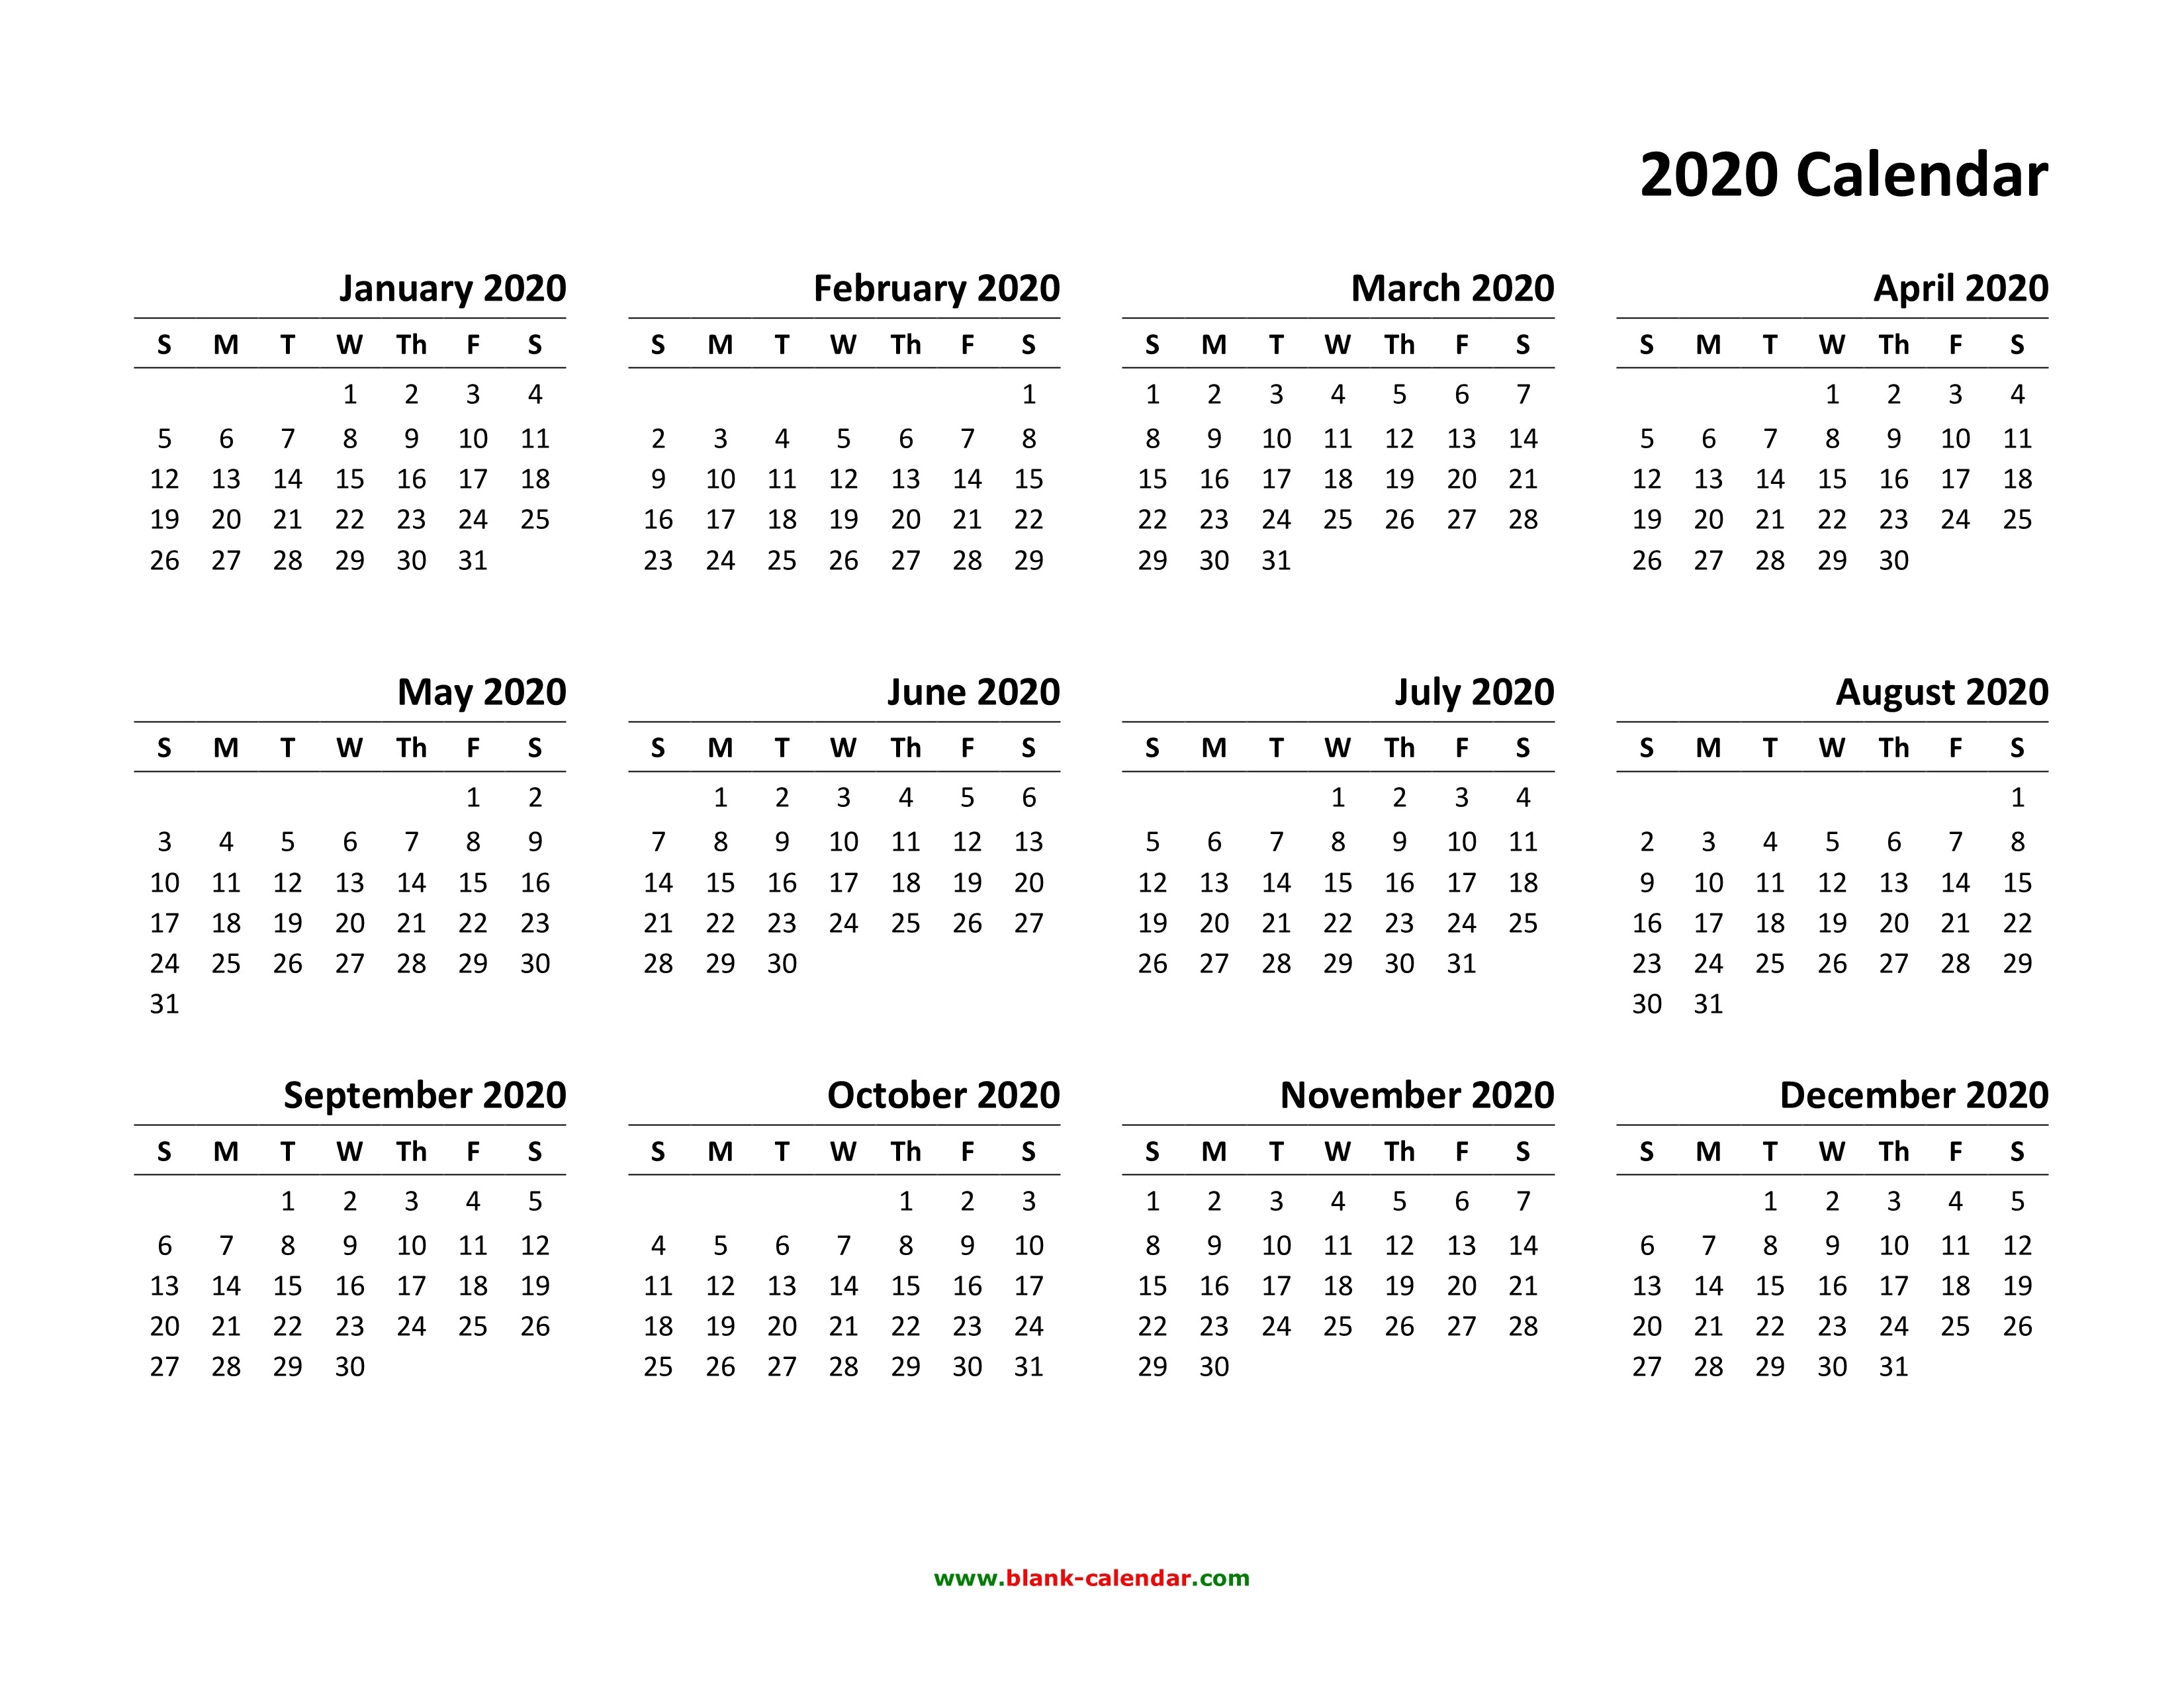 Yearly Calendar 2020 | Free Download And Print-Blank W 9 To Print 2020